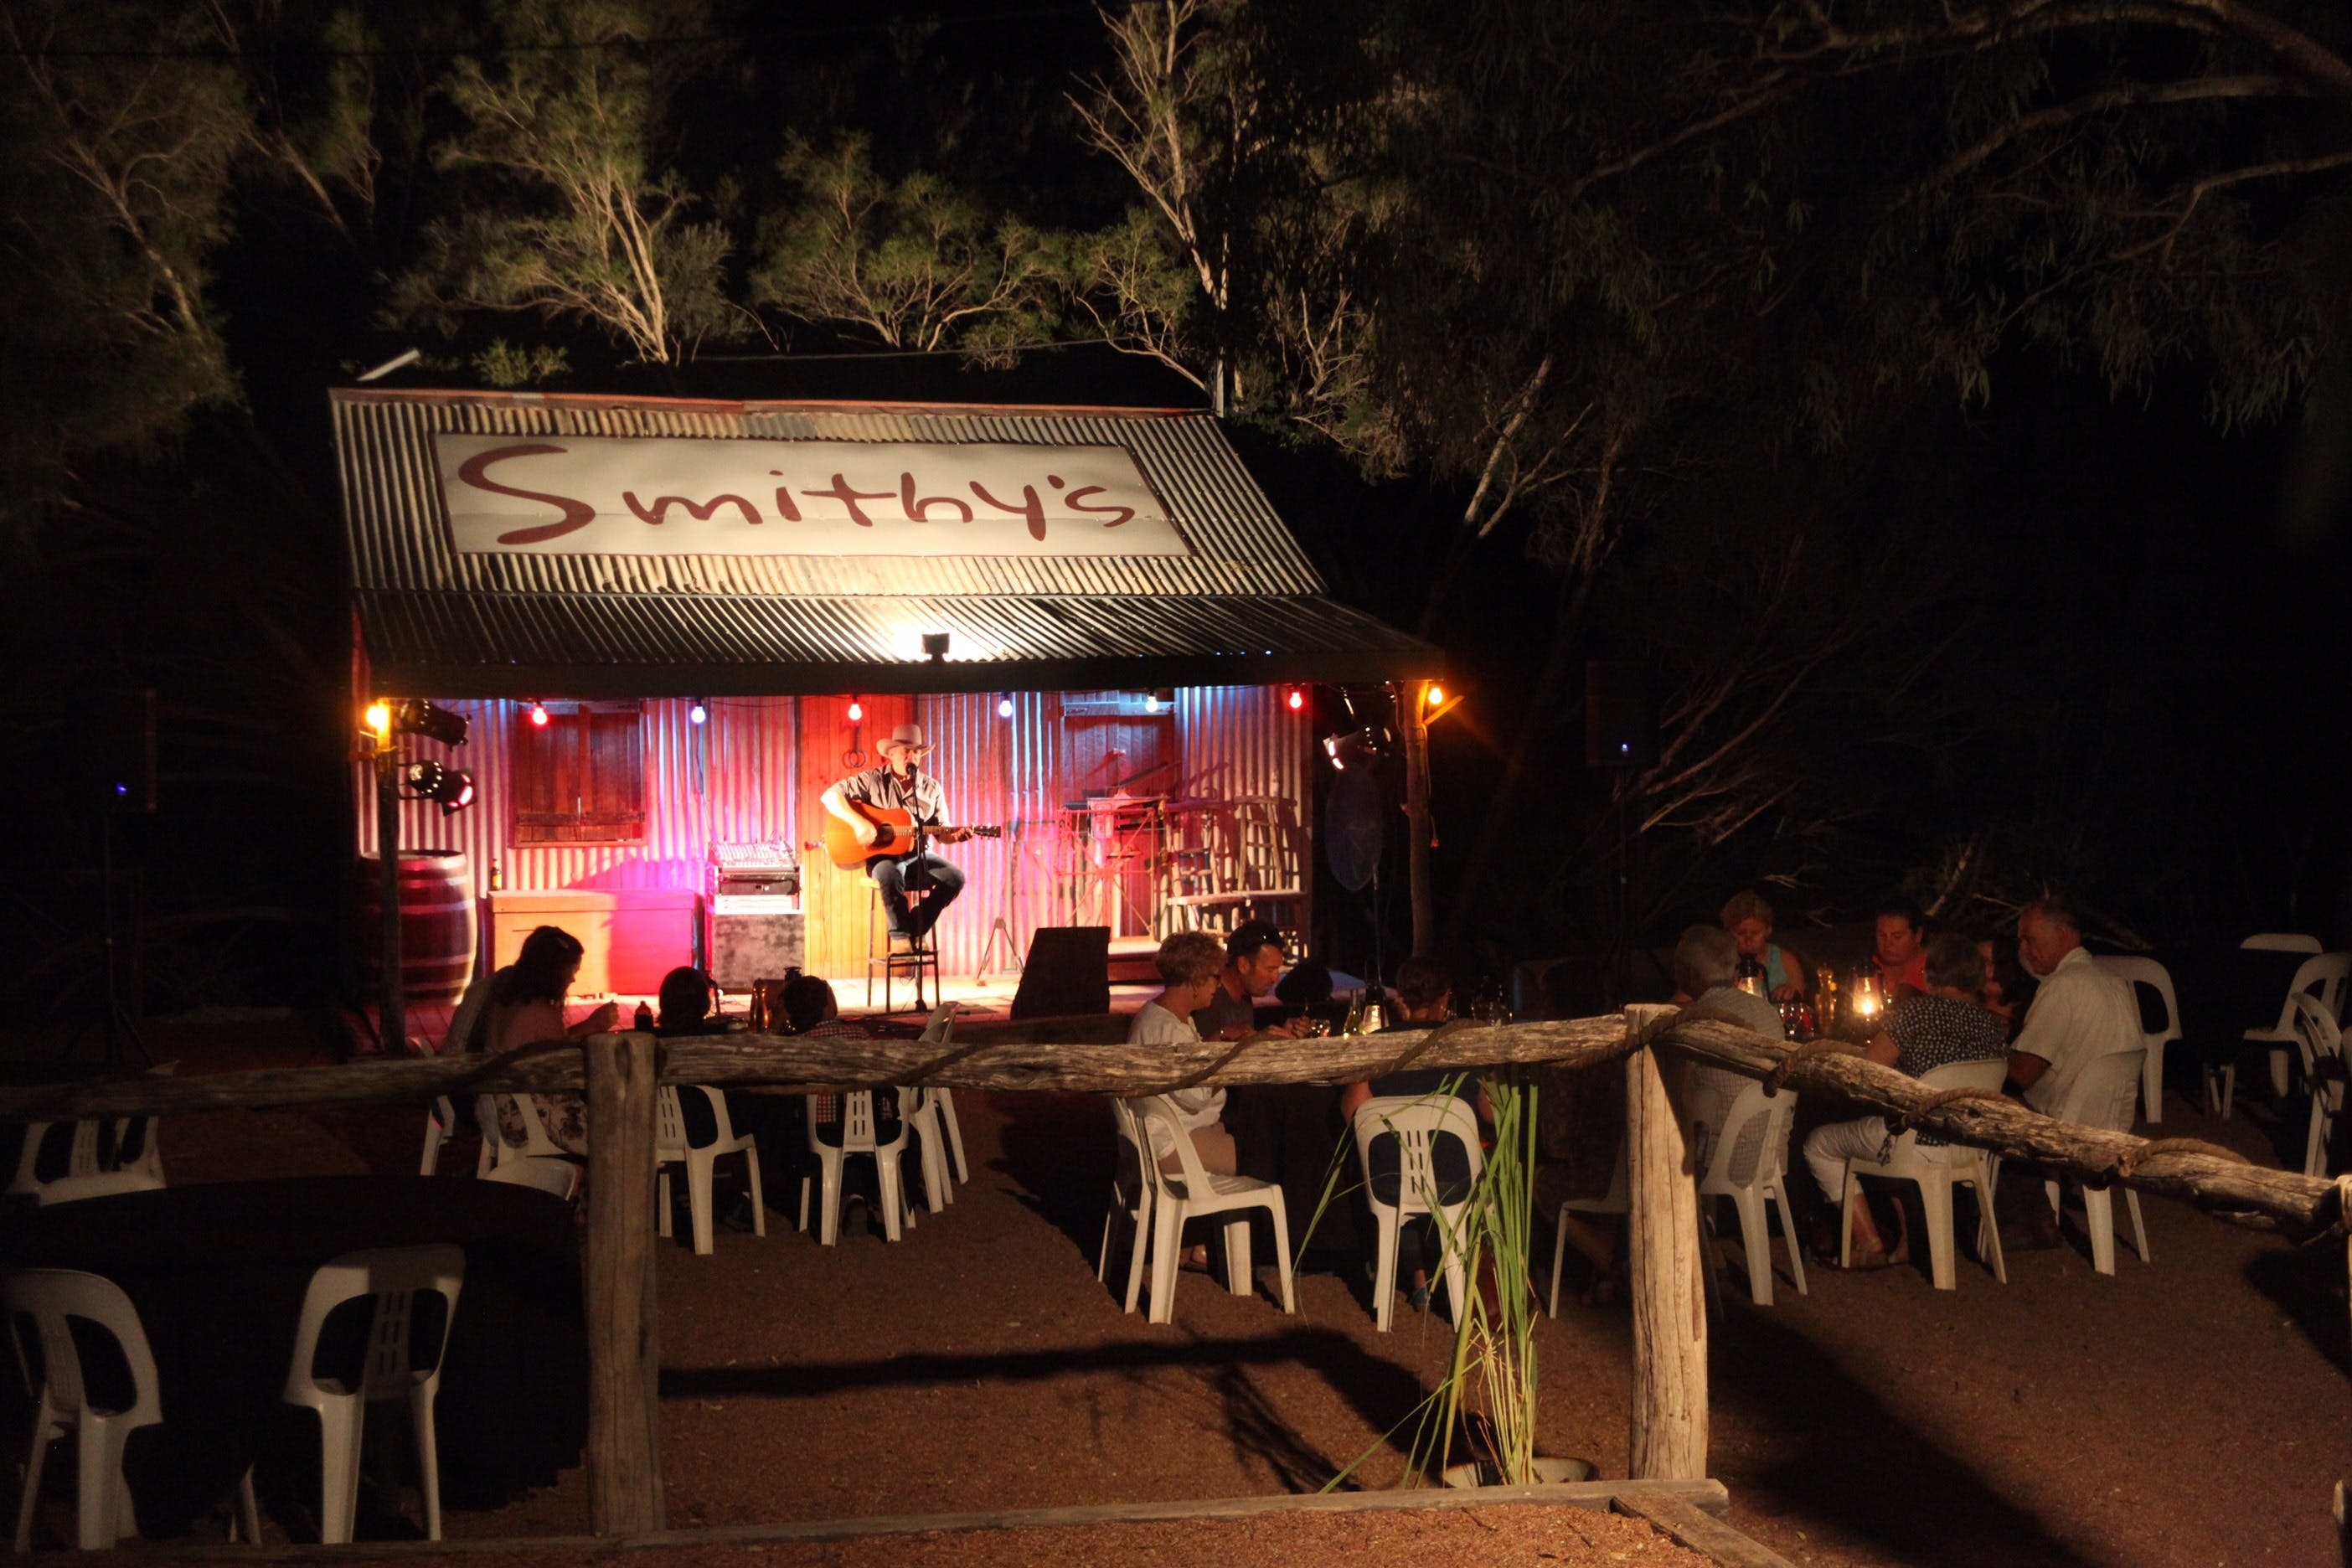 Smithy's Outback Dinner and Show - Lightning Ridge Tourism